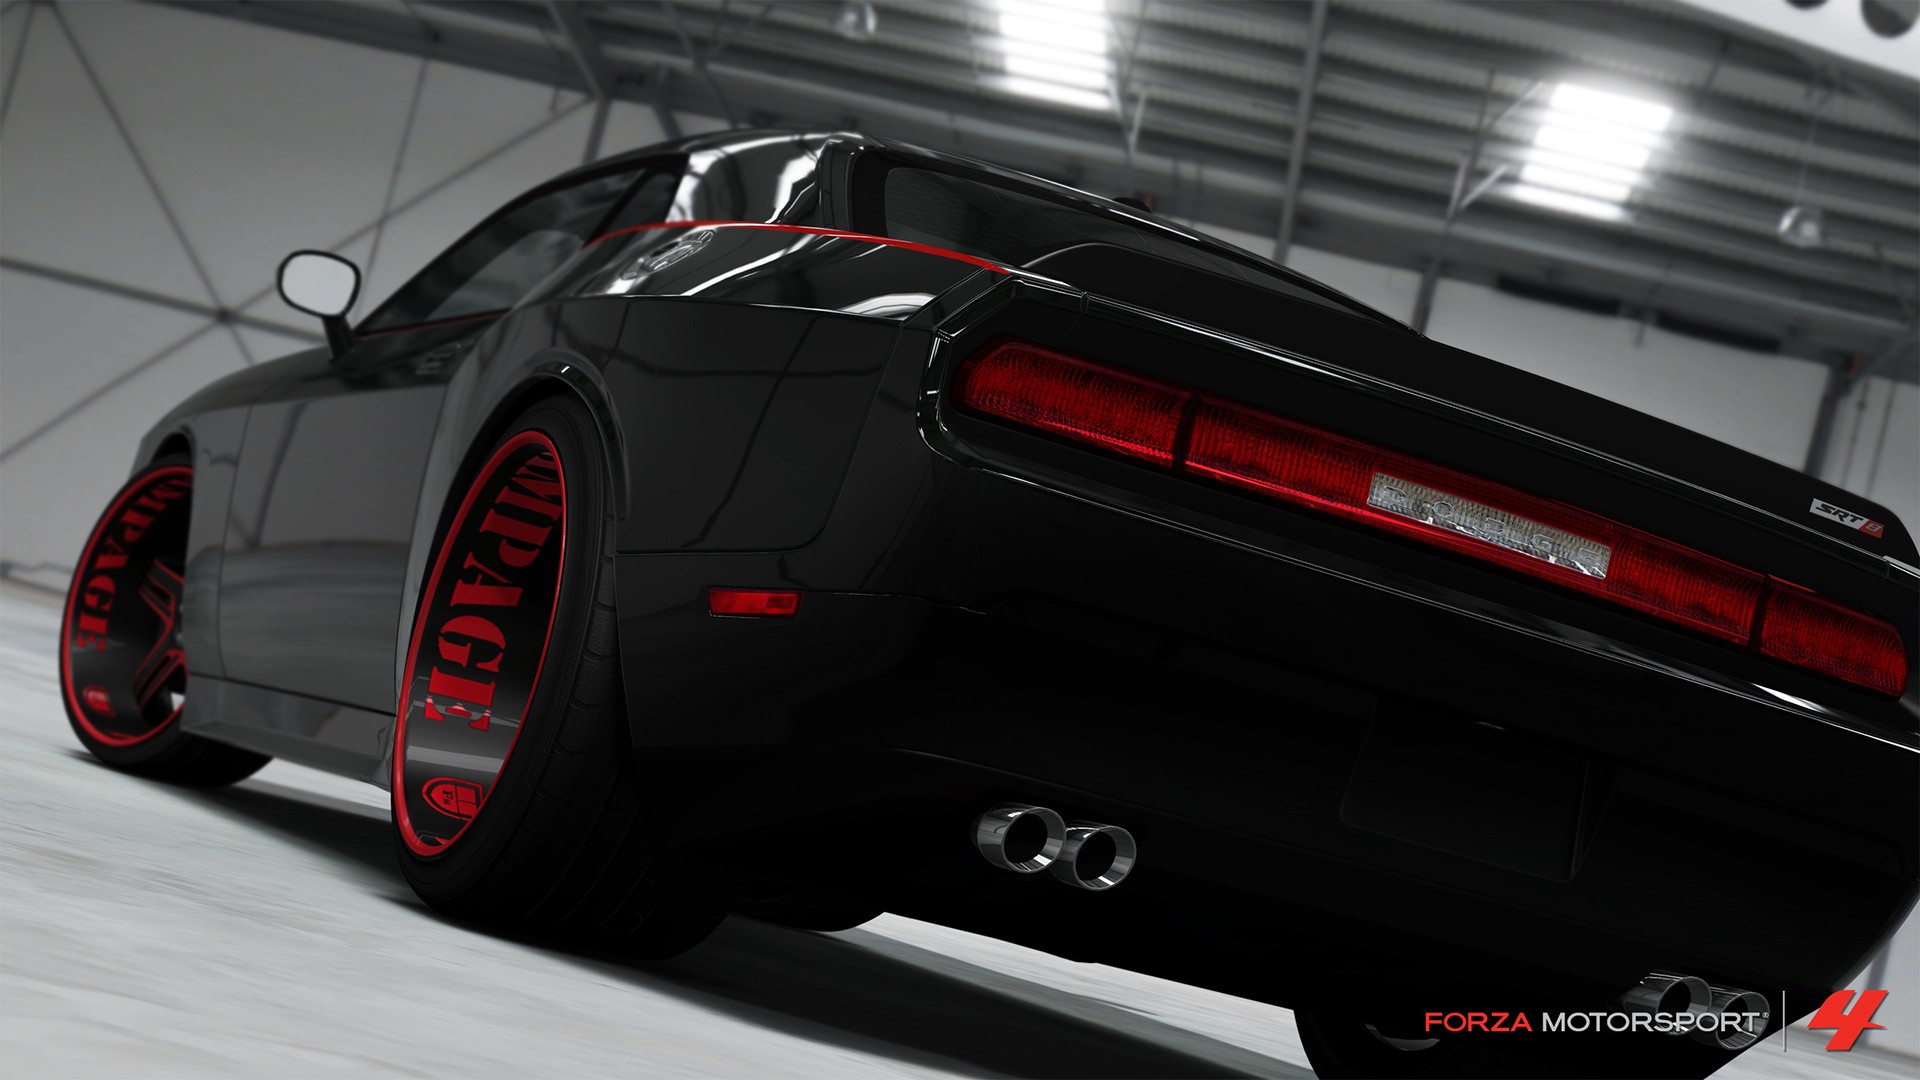 Video Game Forza Motorsport 1920x1080